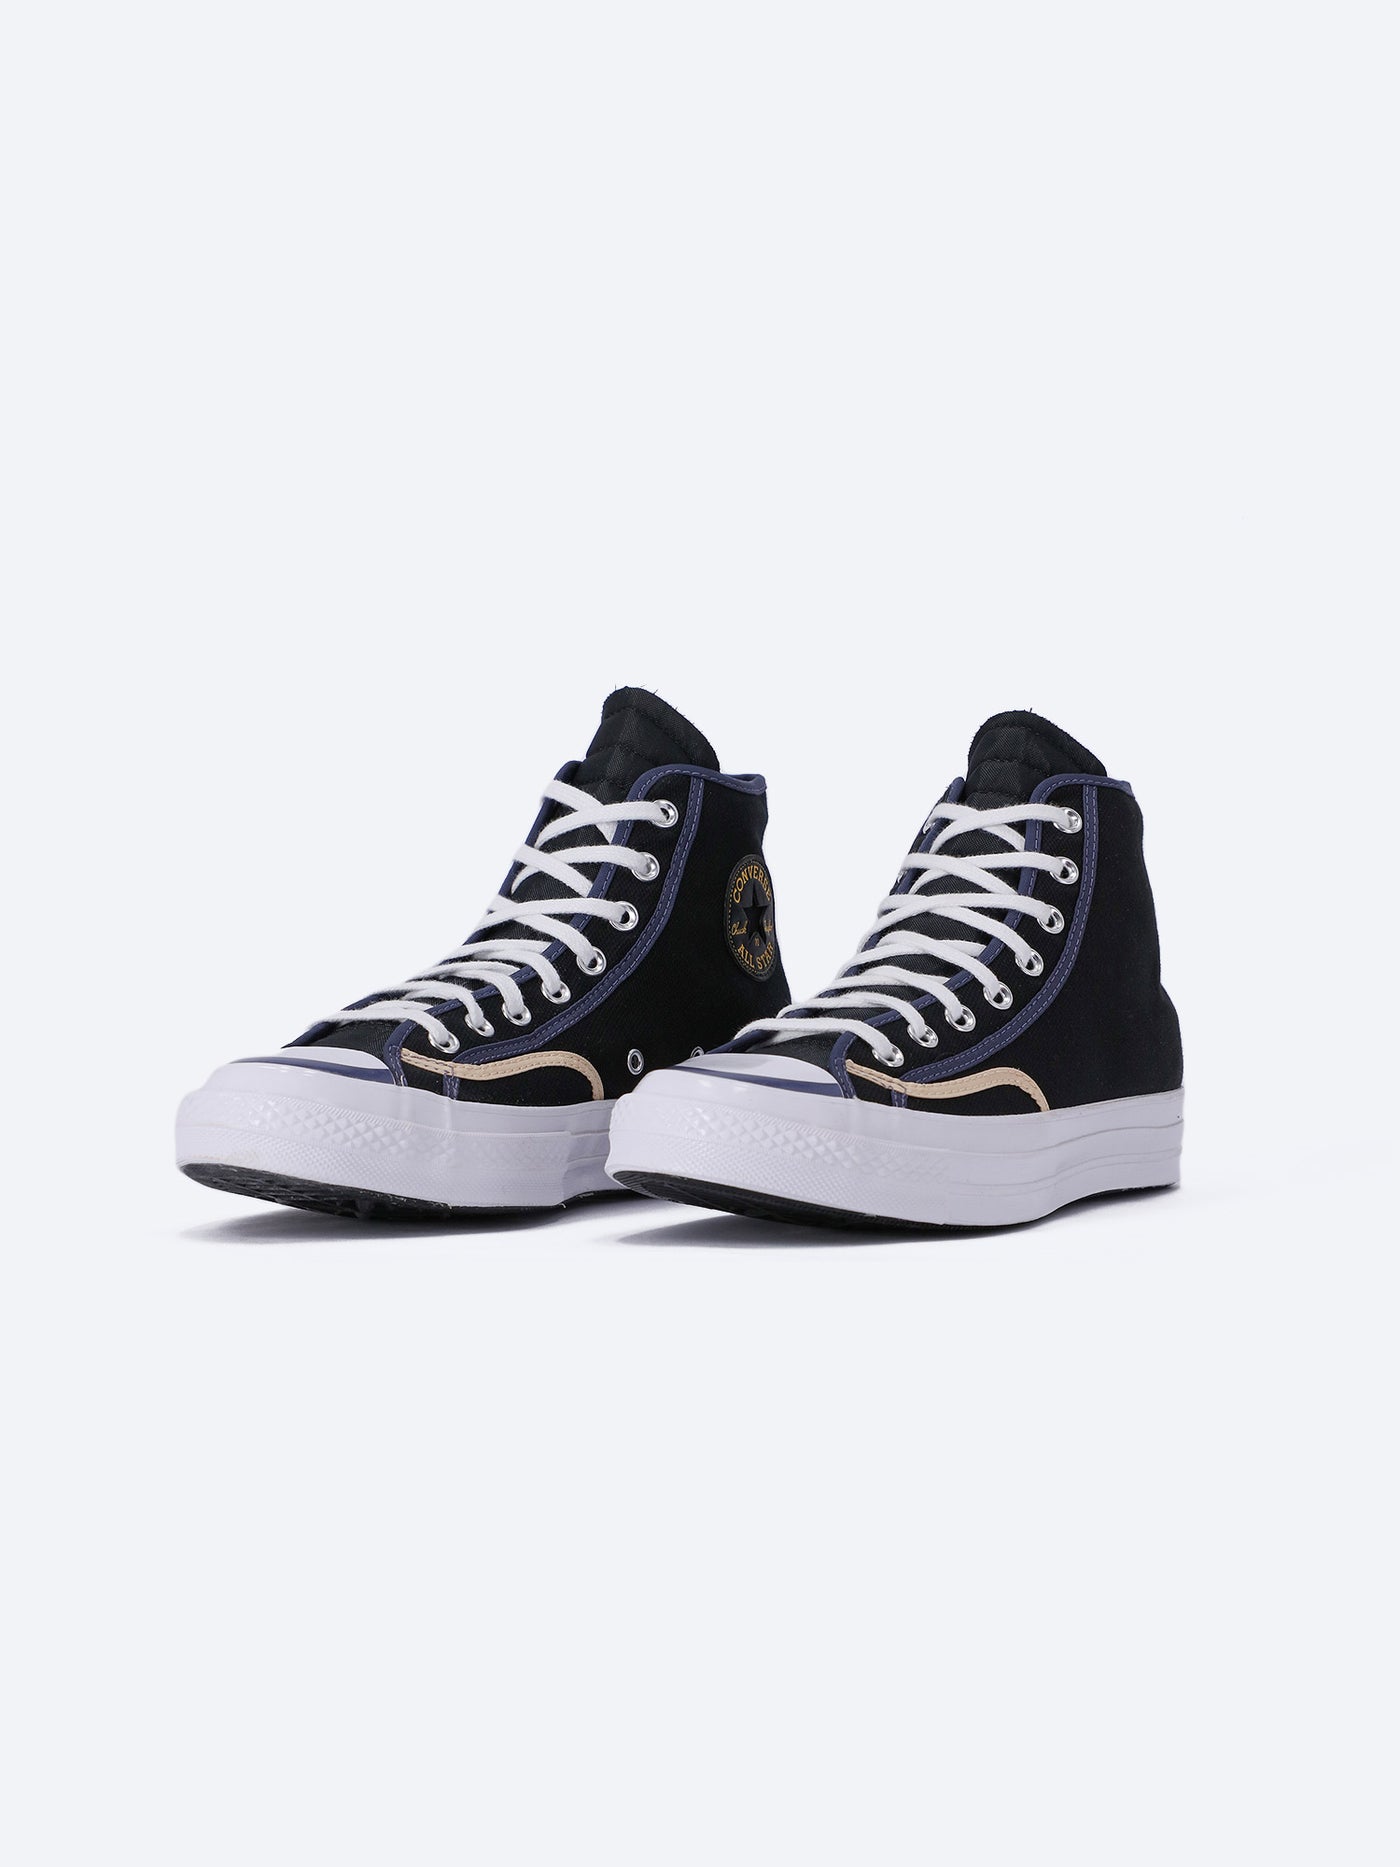 Converse Unisex Chuck 70 French Binding Hybrid Sneaker Shoes